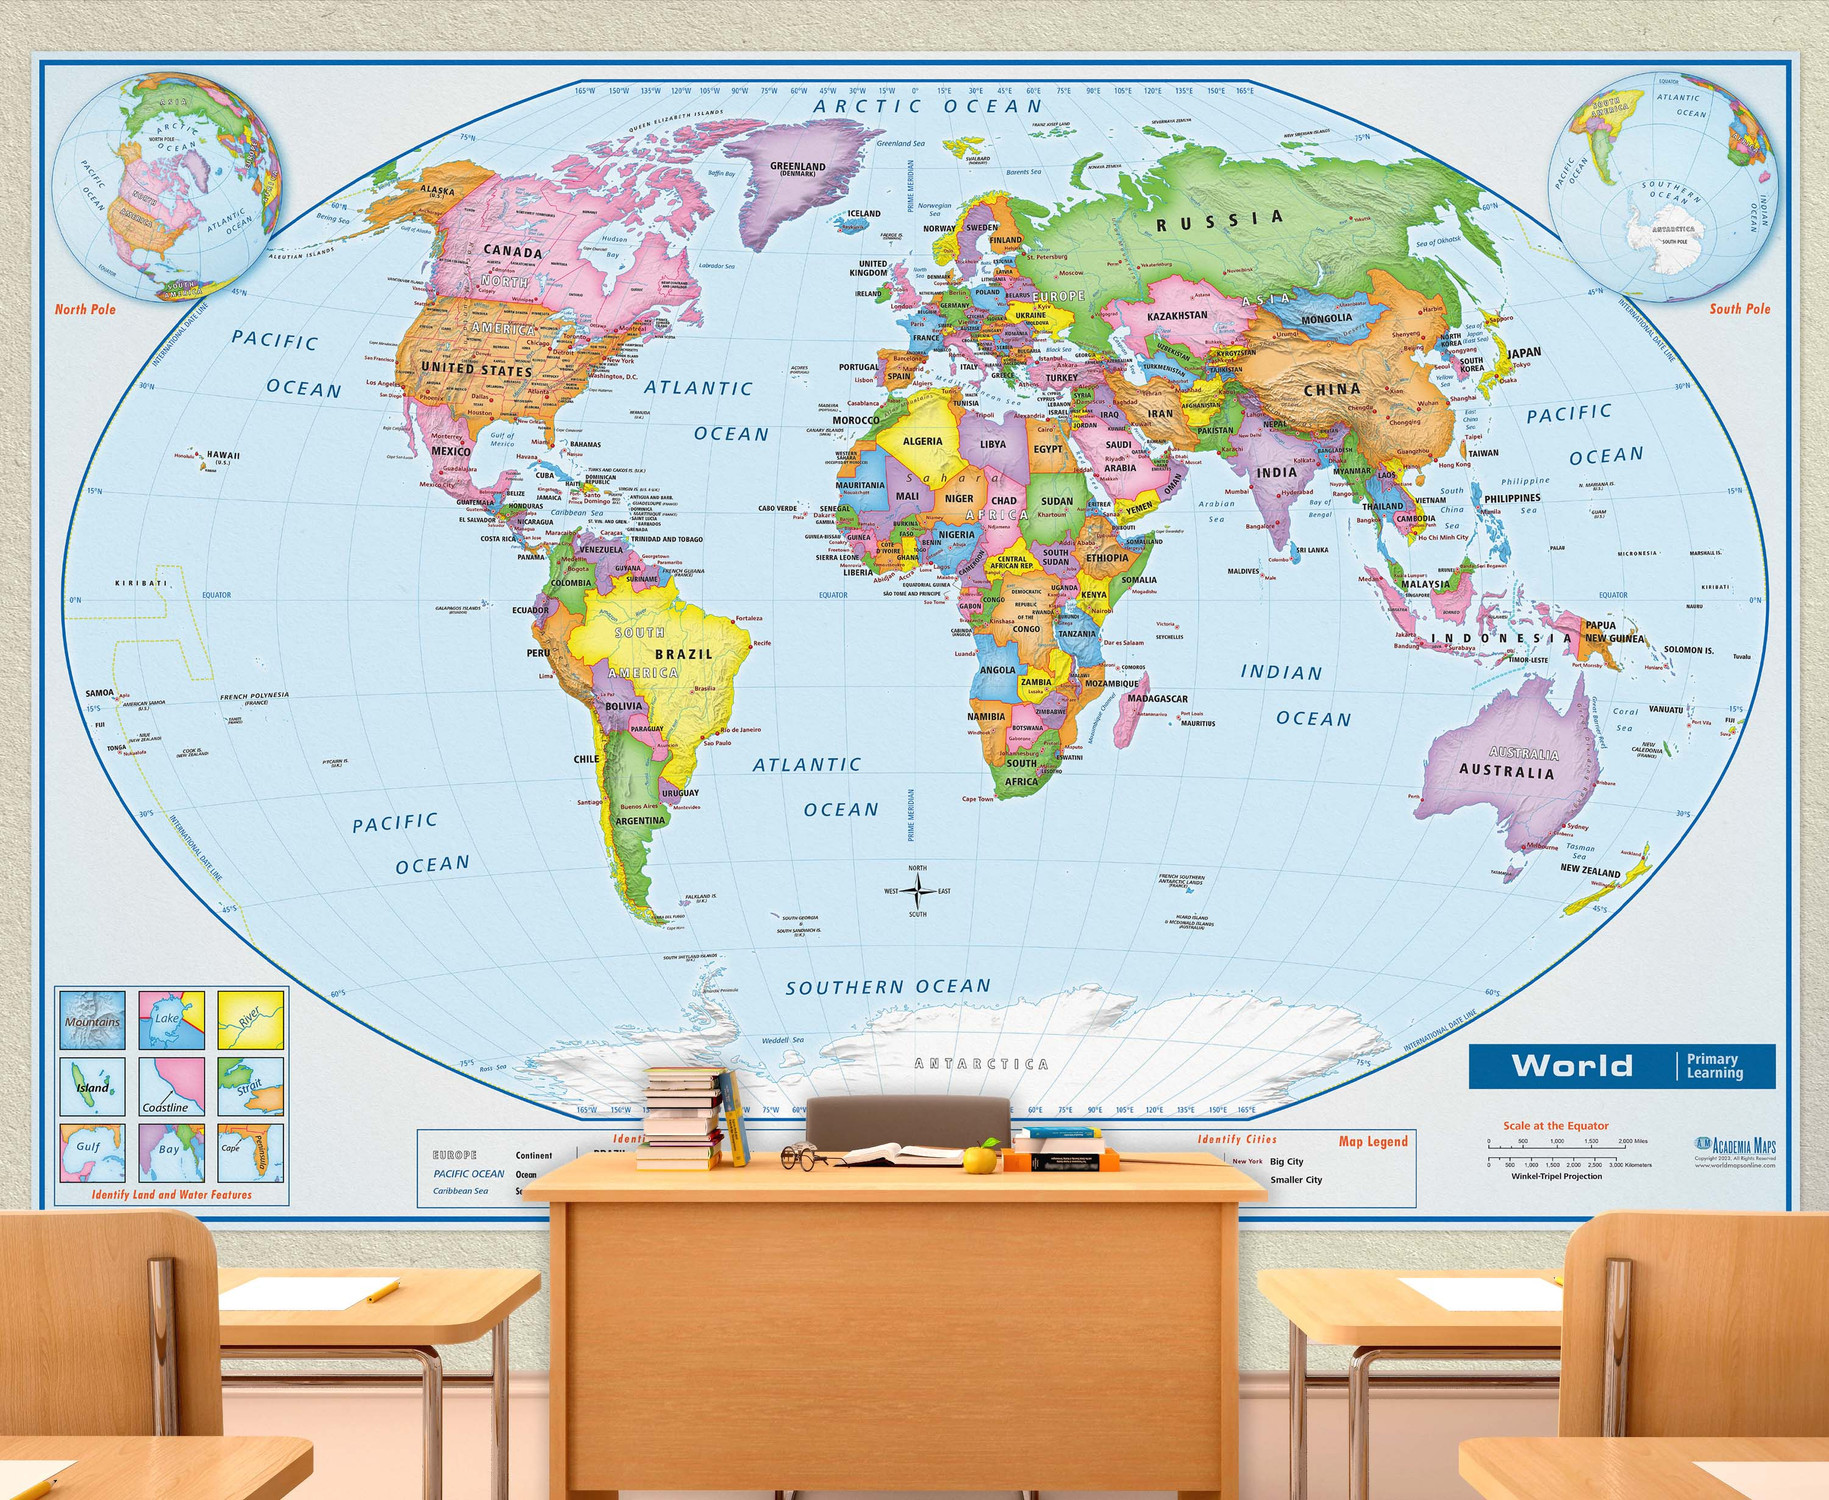 Primary Learning Classroom World Map Removable Wallpaper Mural in Room, World Maps Online